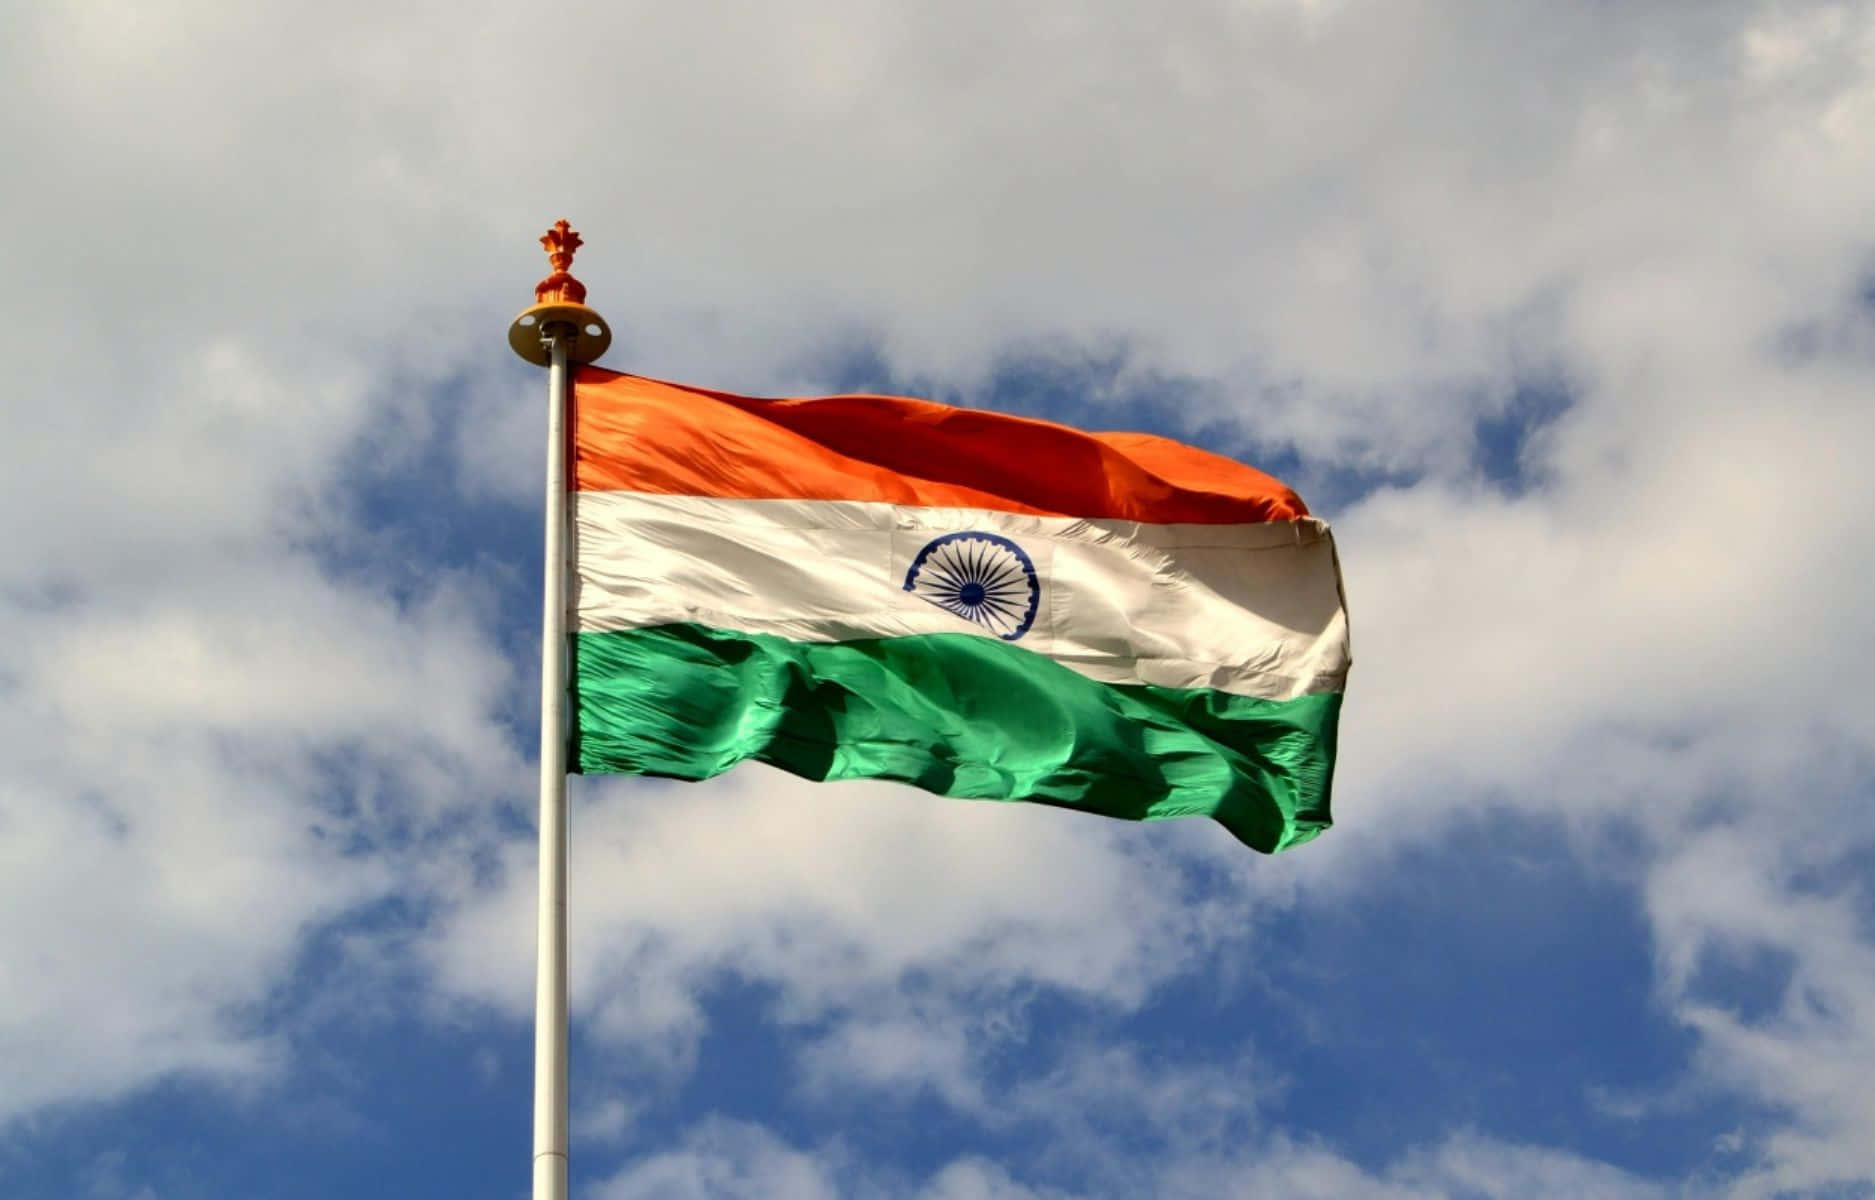 Saluting the Indian Flag, symbol of national pride